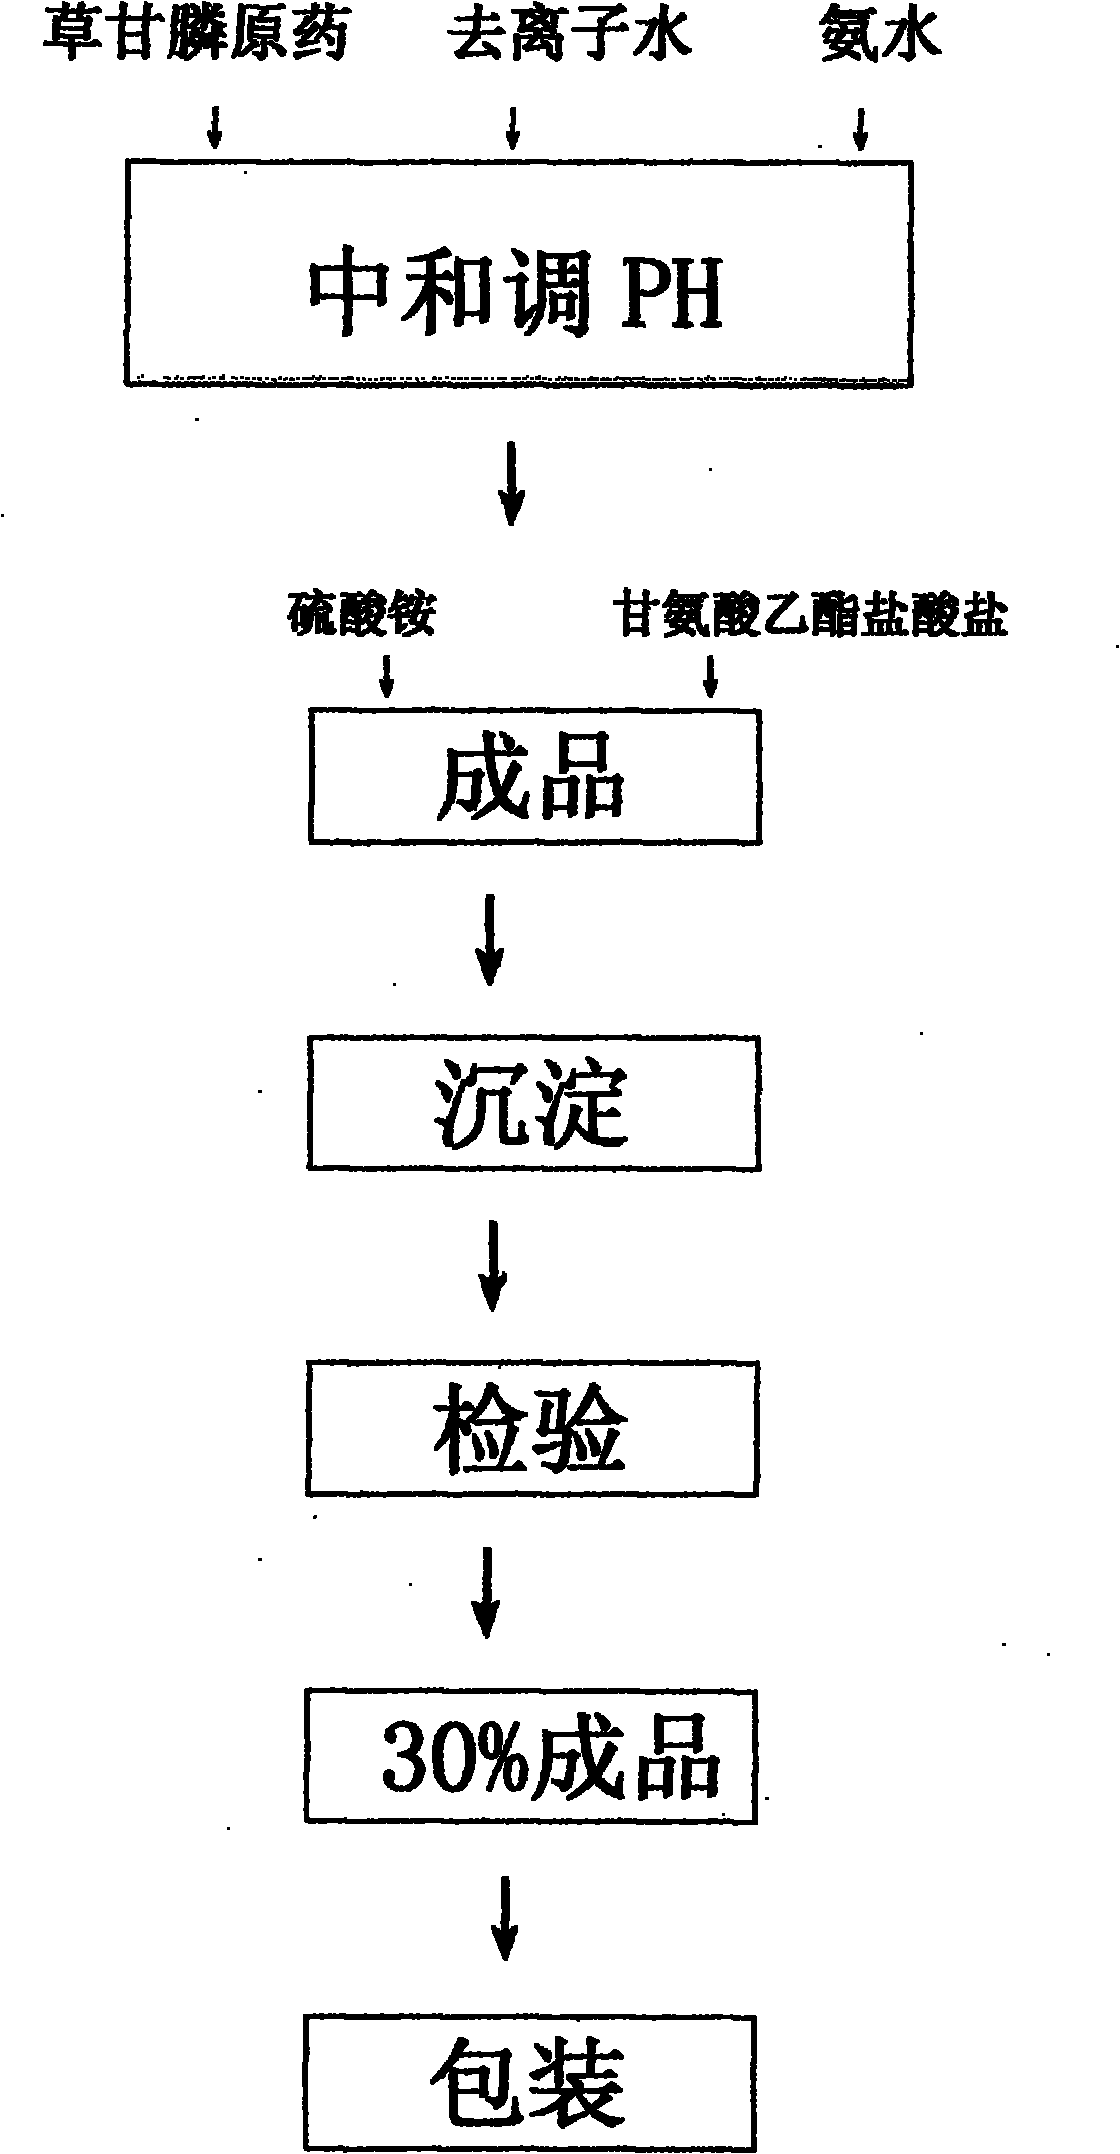 Method for preparing gyphosate solution from glyphosate raw material